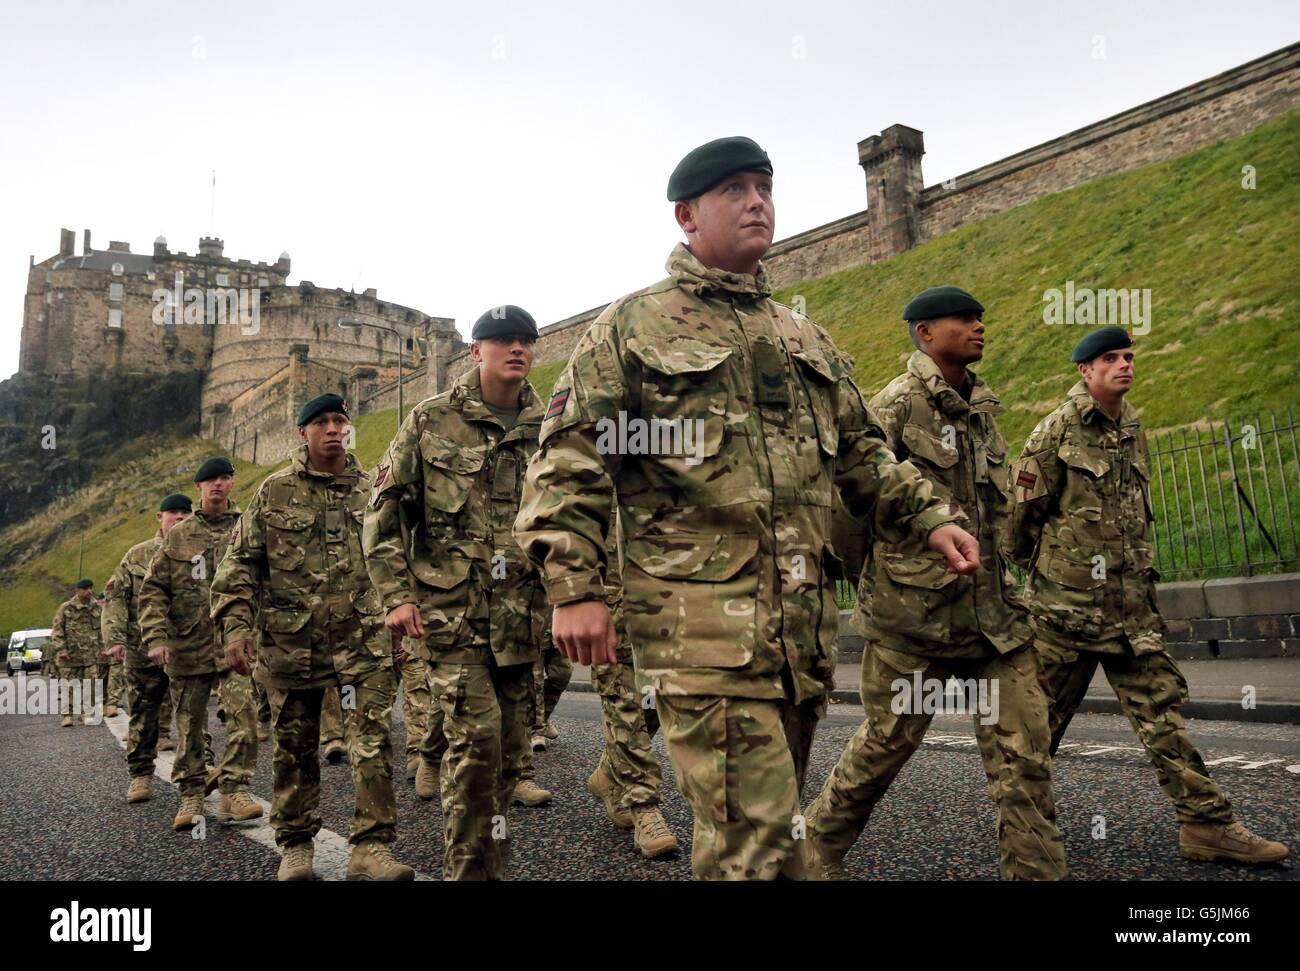 Soldiers from the 3rd Battalion The Rifles(3 Rifles) become the first English battalion to be granted the freedom of the city of Edinburgh as they parade down the Royal Mile, with Edinburgh Castle in the background. Stock Photo